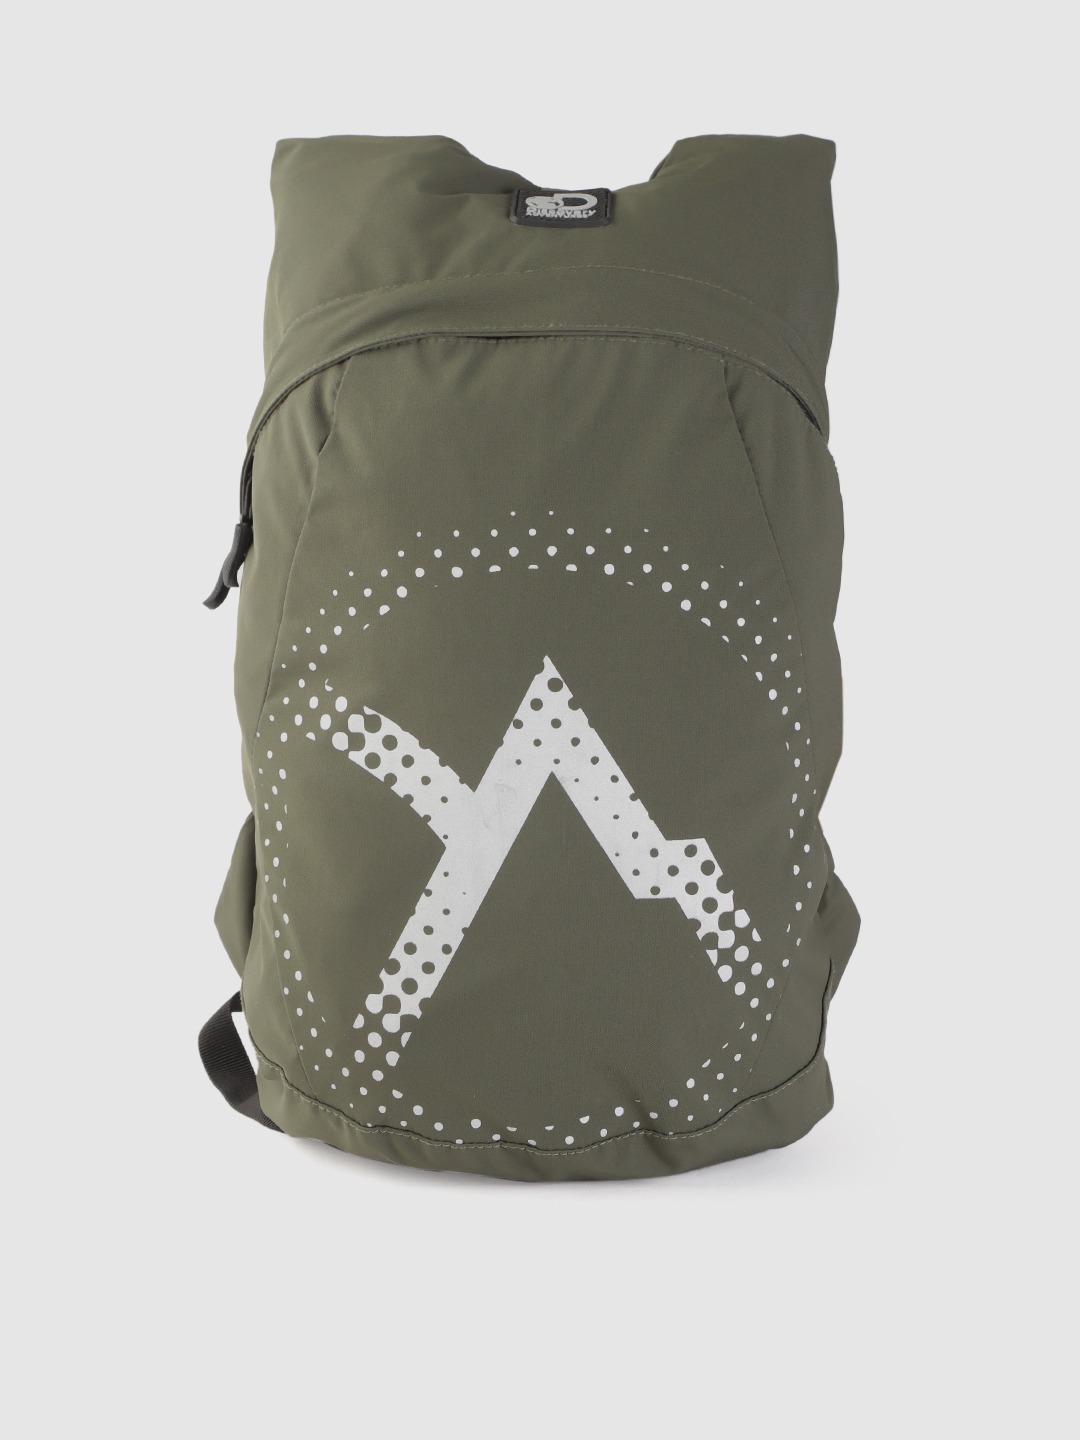 Accessories Backpacks | The Roadster Lifestyle Co x Discovery Adventures Unisex Green & White Graphic Print Foldable Backpack - JN86538